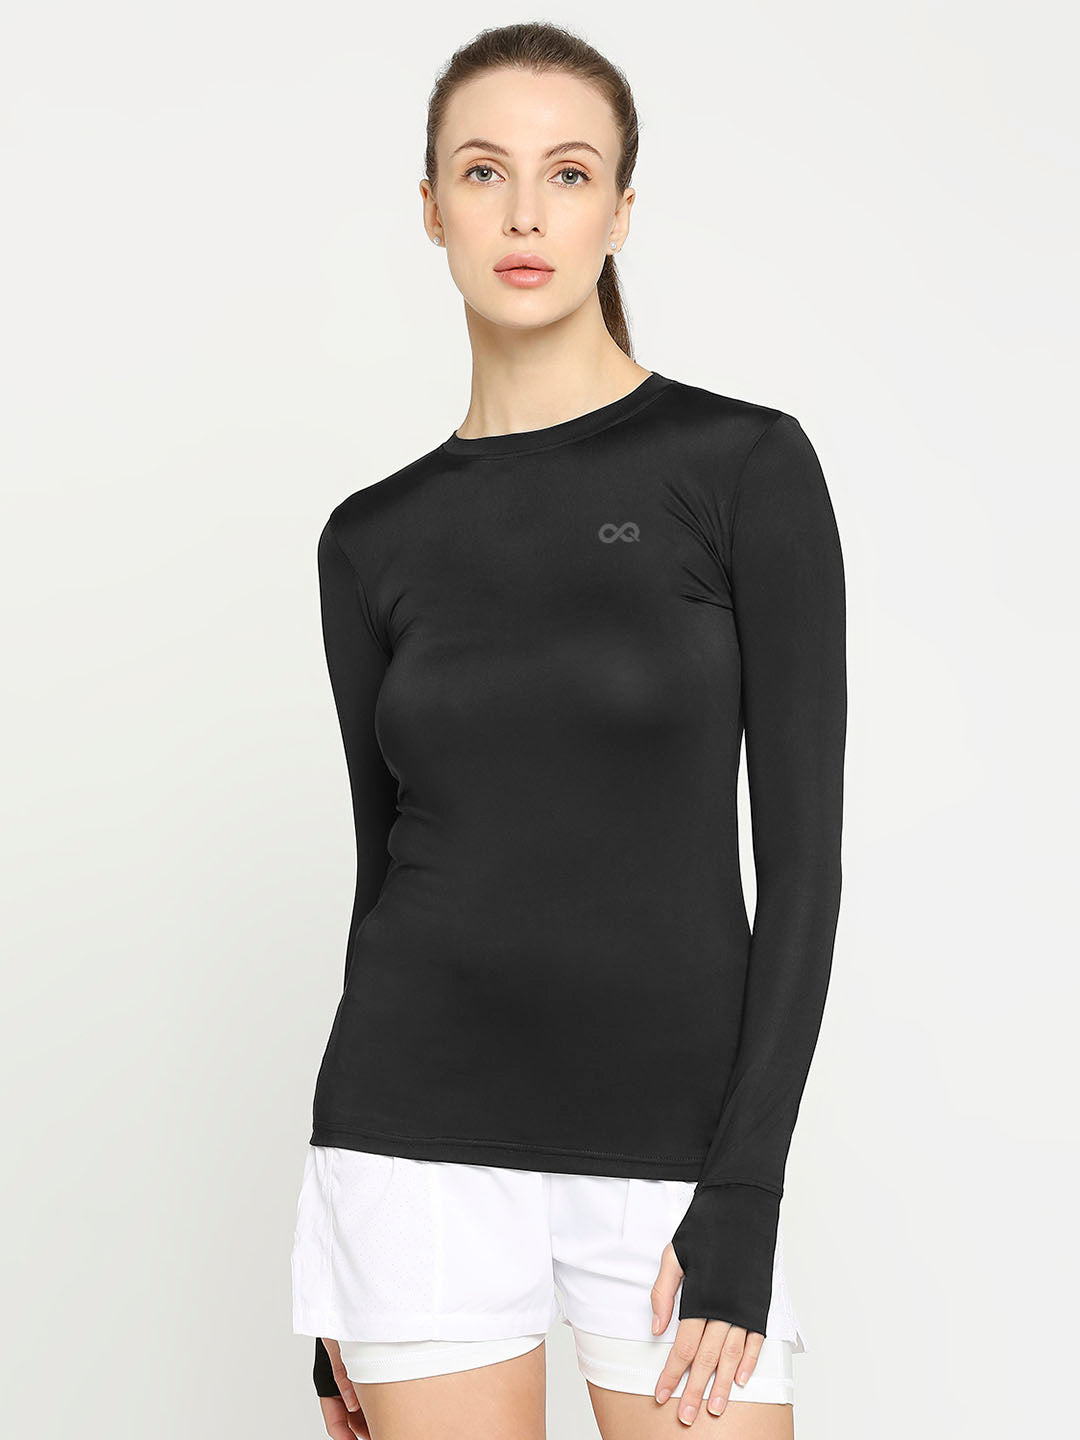 Long Sleeved Ladies Sportswear: Fashionable And Comfortable